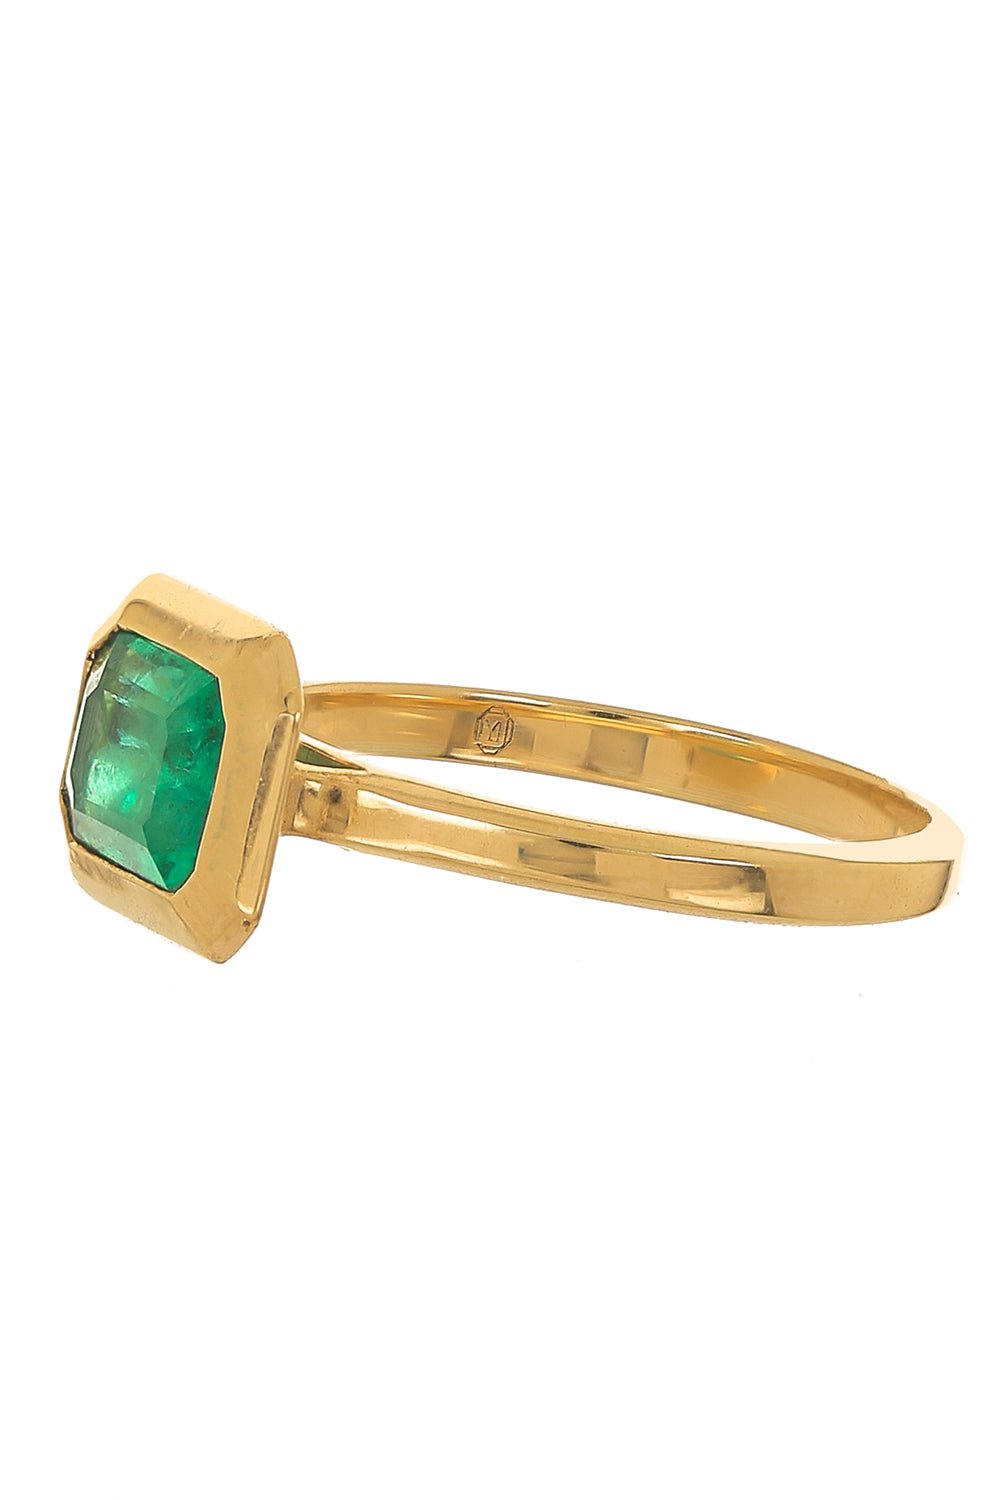 YI COLLECTION-Emerald Nouveau Ring-YELLOW GOLD